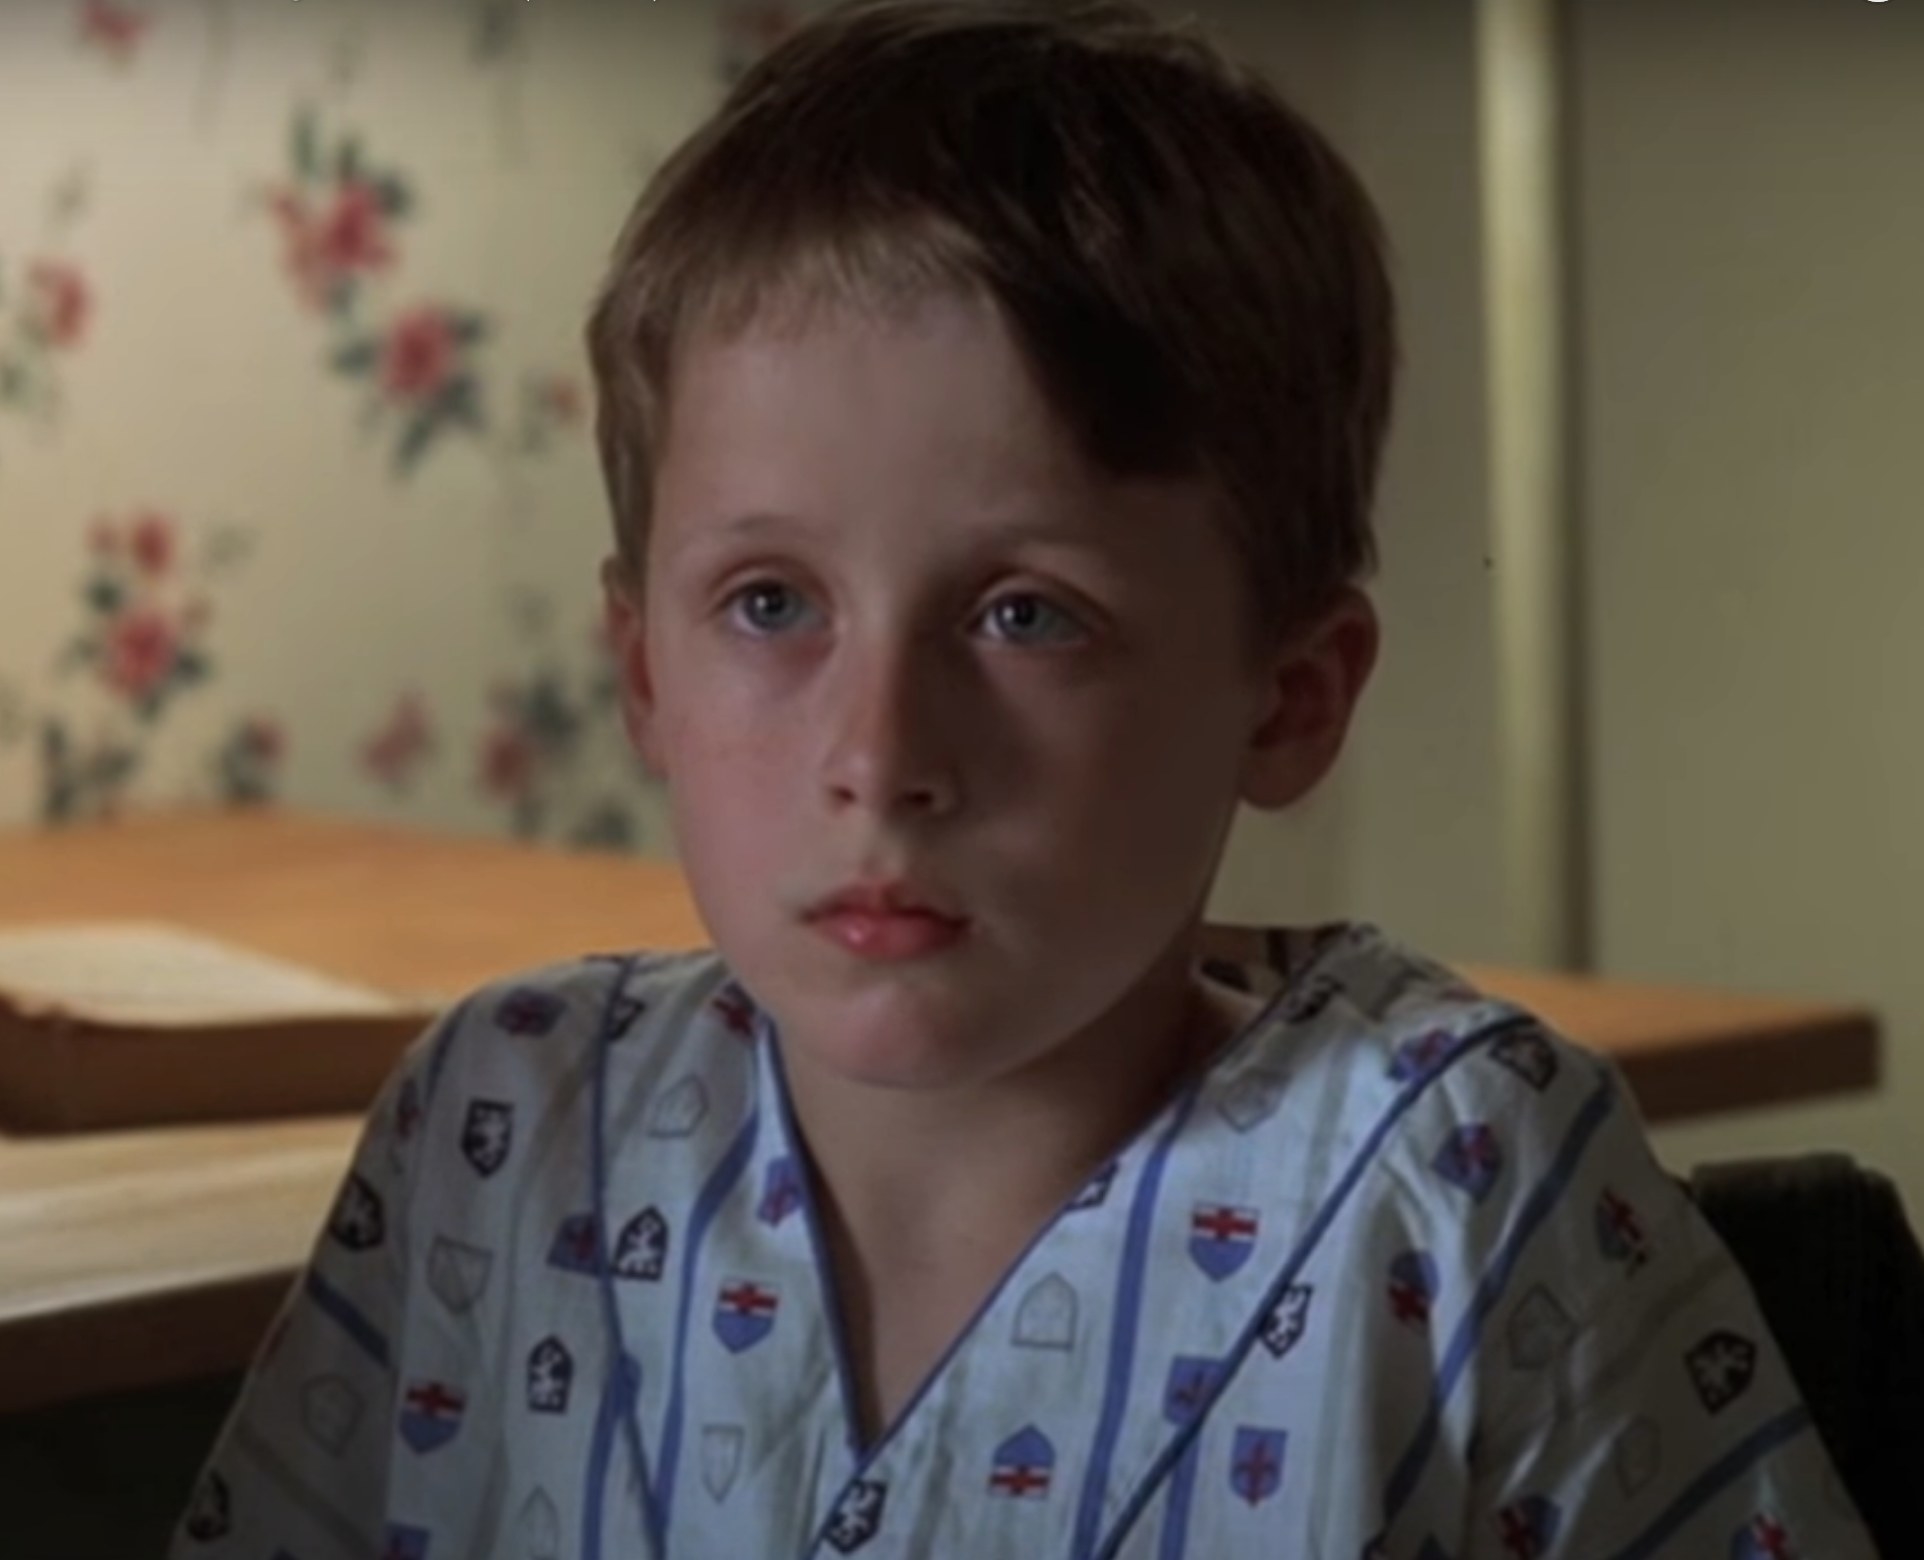 Rory Culkin as Rudy listens to Terry, who is preparing to leave town